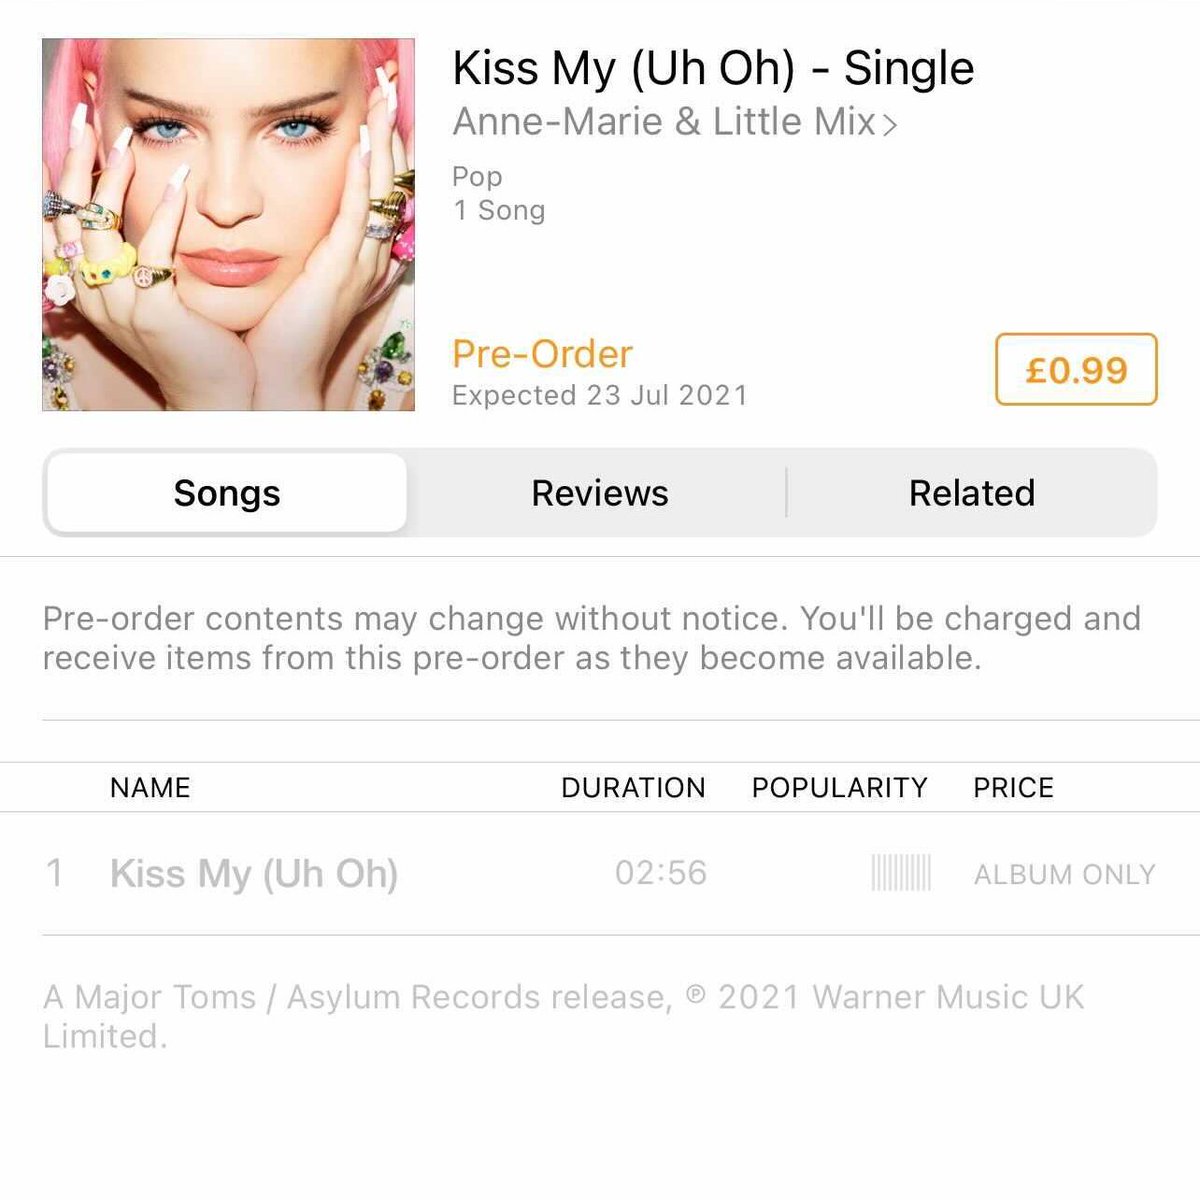 UH OHHHH 💋💋 @LittleMix  
10 DAYS! Pre-order now ✨ ✨✨ lnk.to/Kiss-My